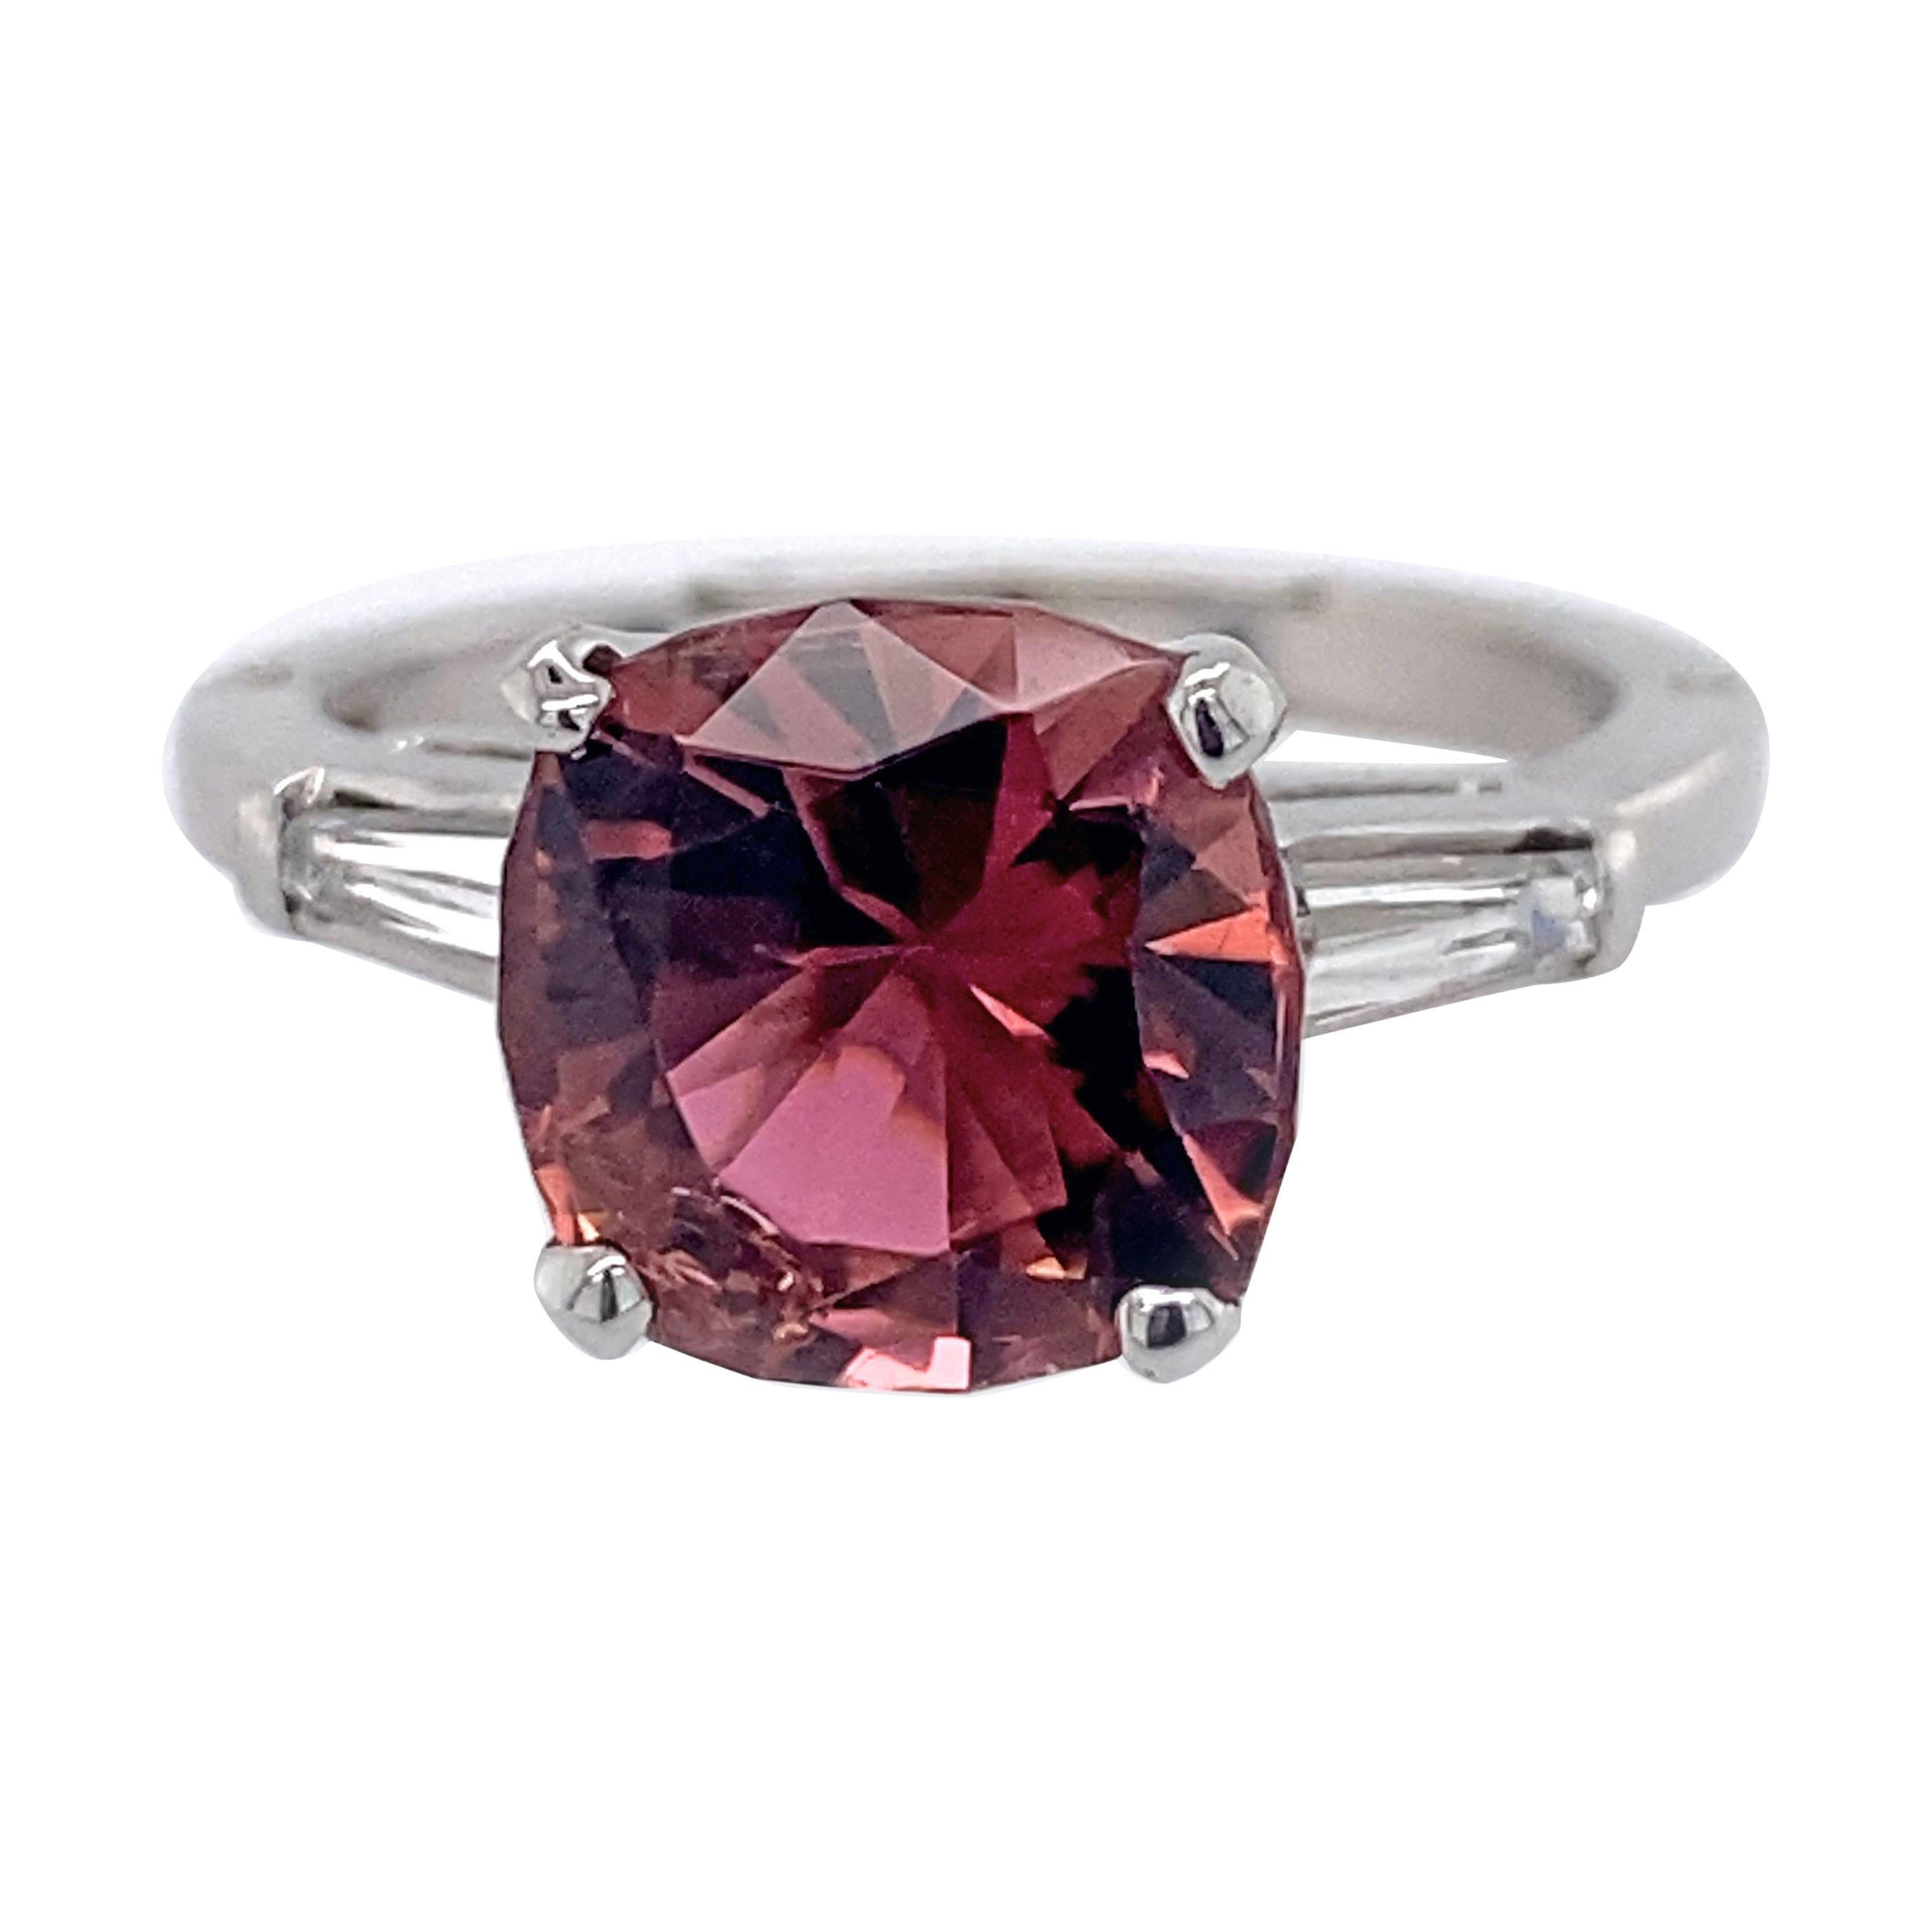 2.9 Carat Pink Tourmaline Engagement Ring with Baguettes in Platinum & Gold